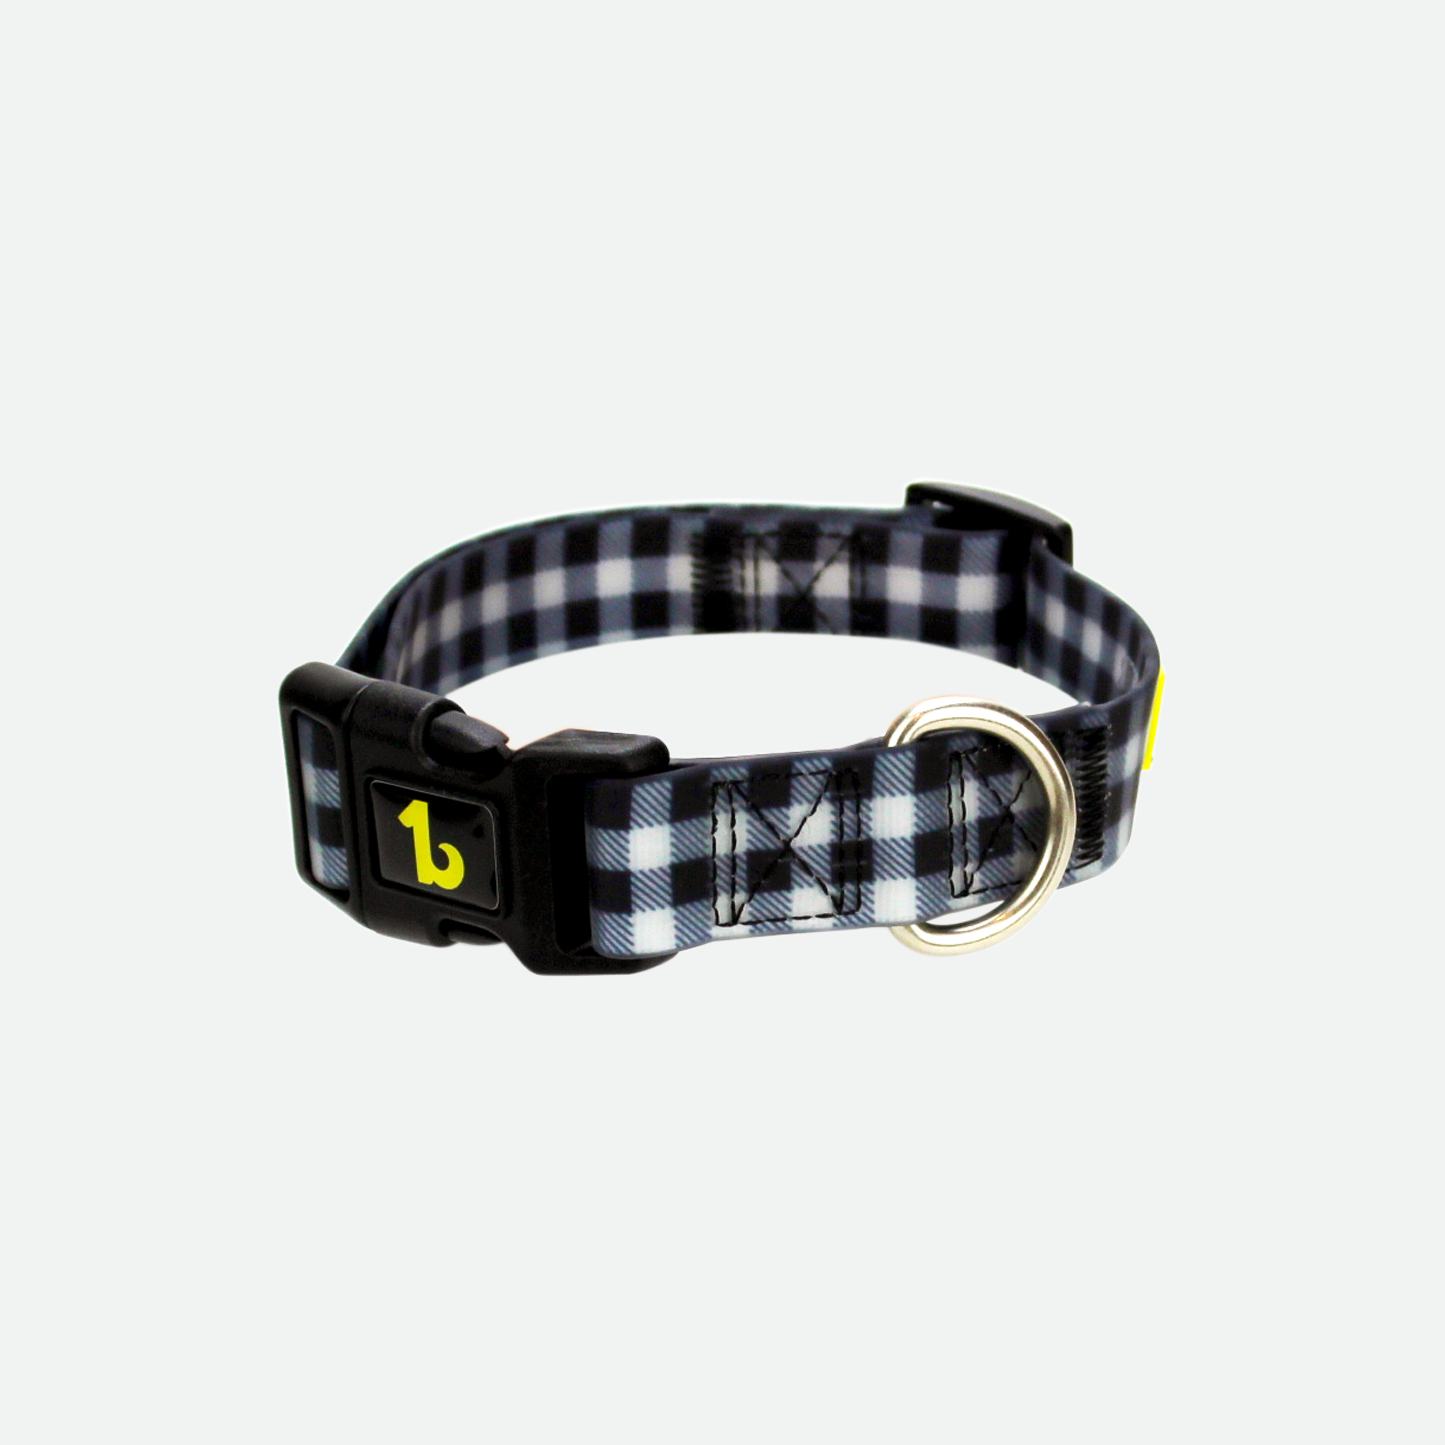 Silicone collar for dog, black plaid style